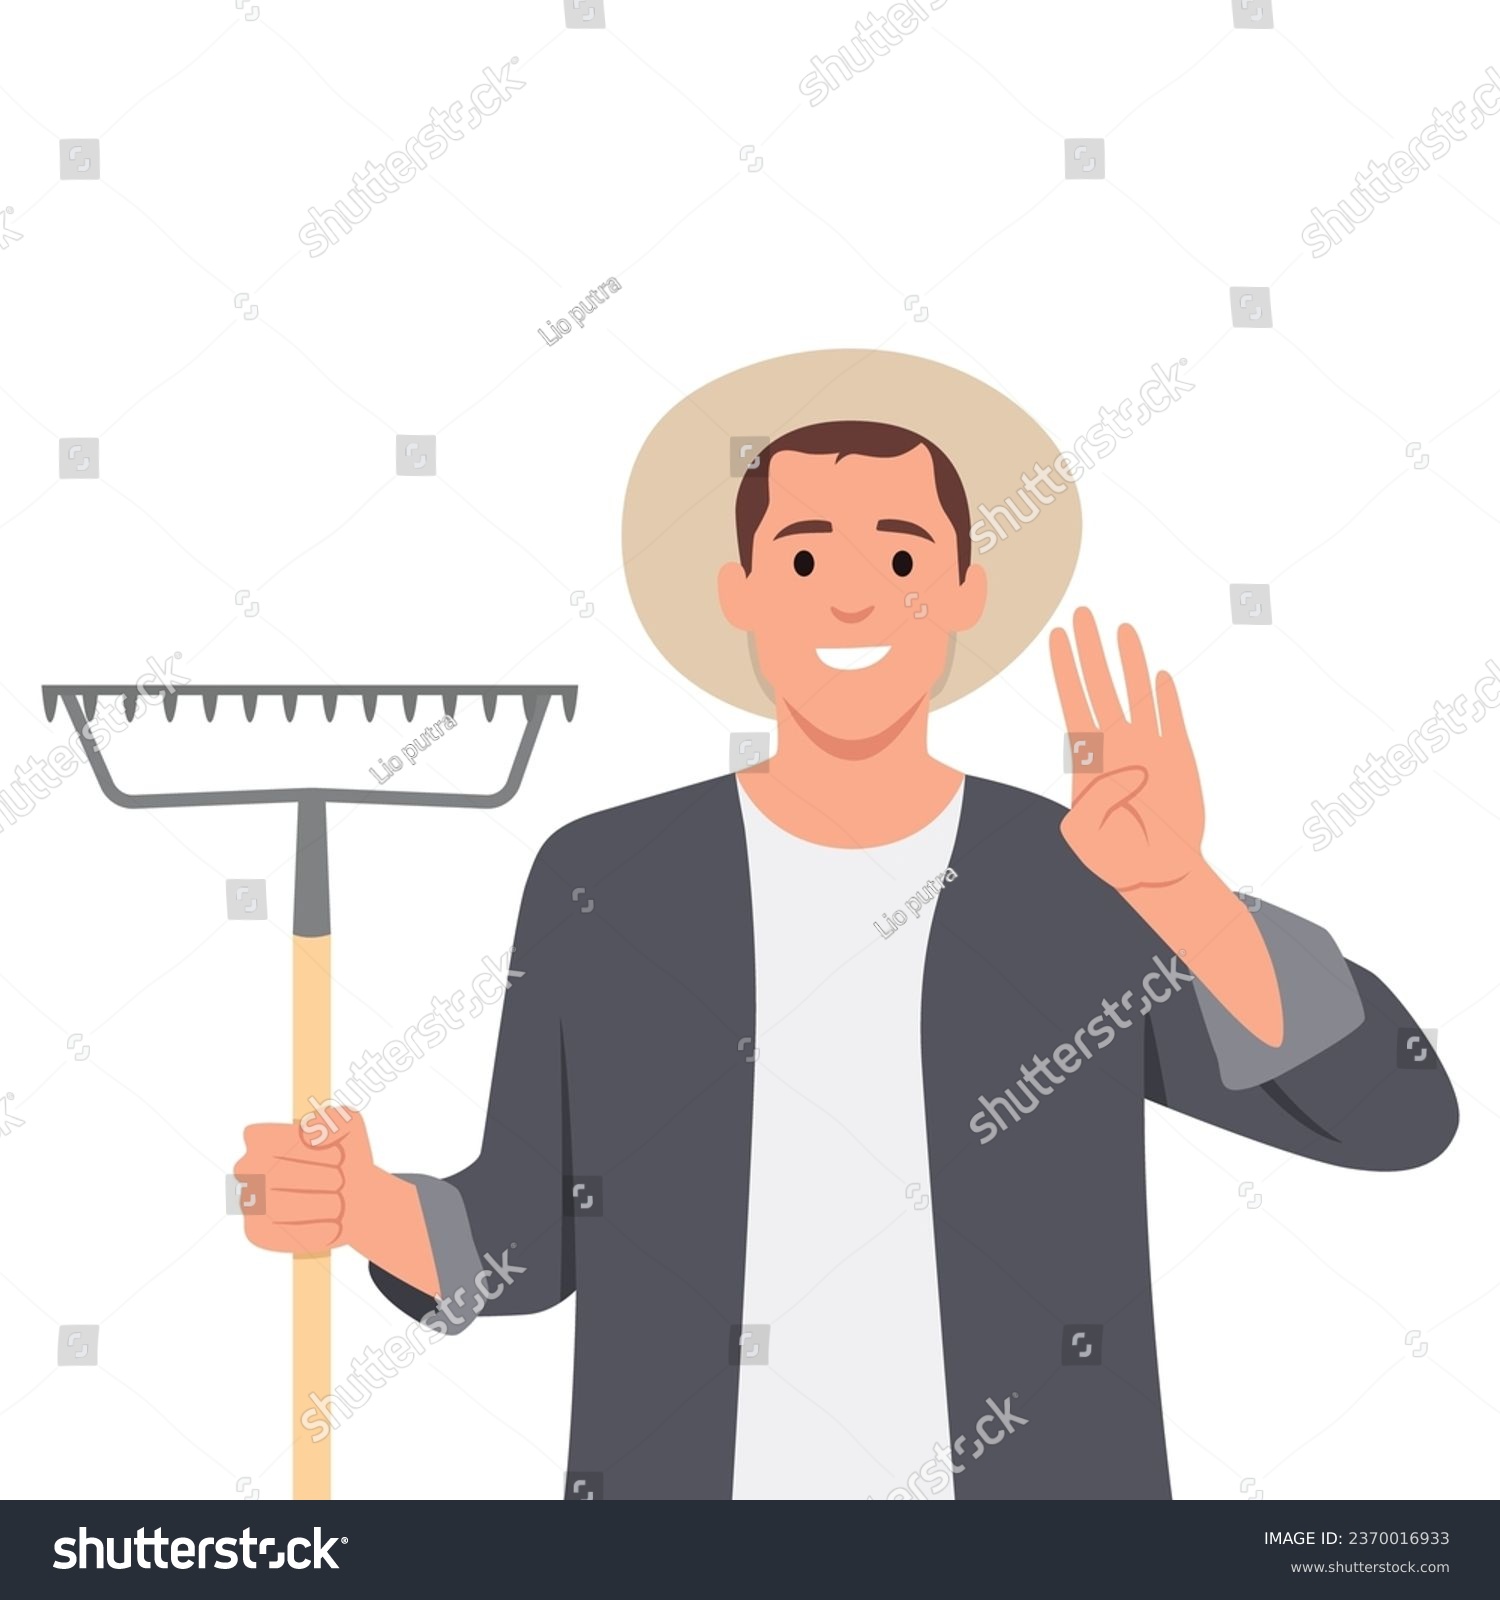 SVG of Young man smiling and looking friendly, showing number four. farmer concept. Flat vector illustration isolated on white background svg